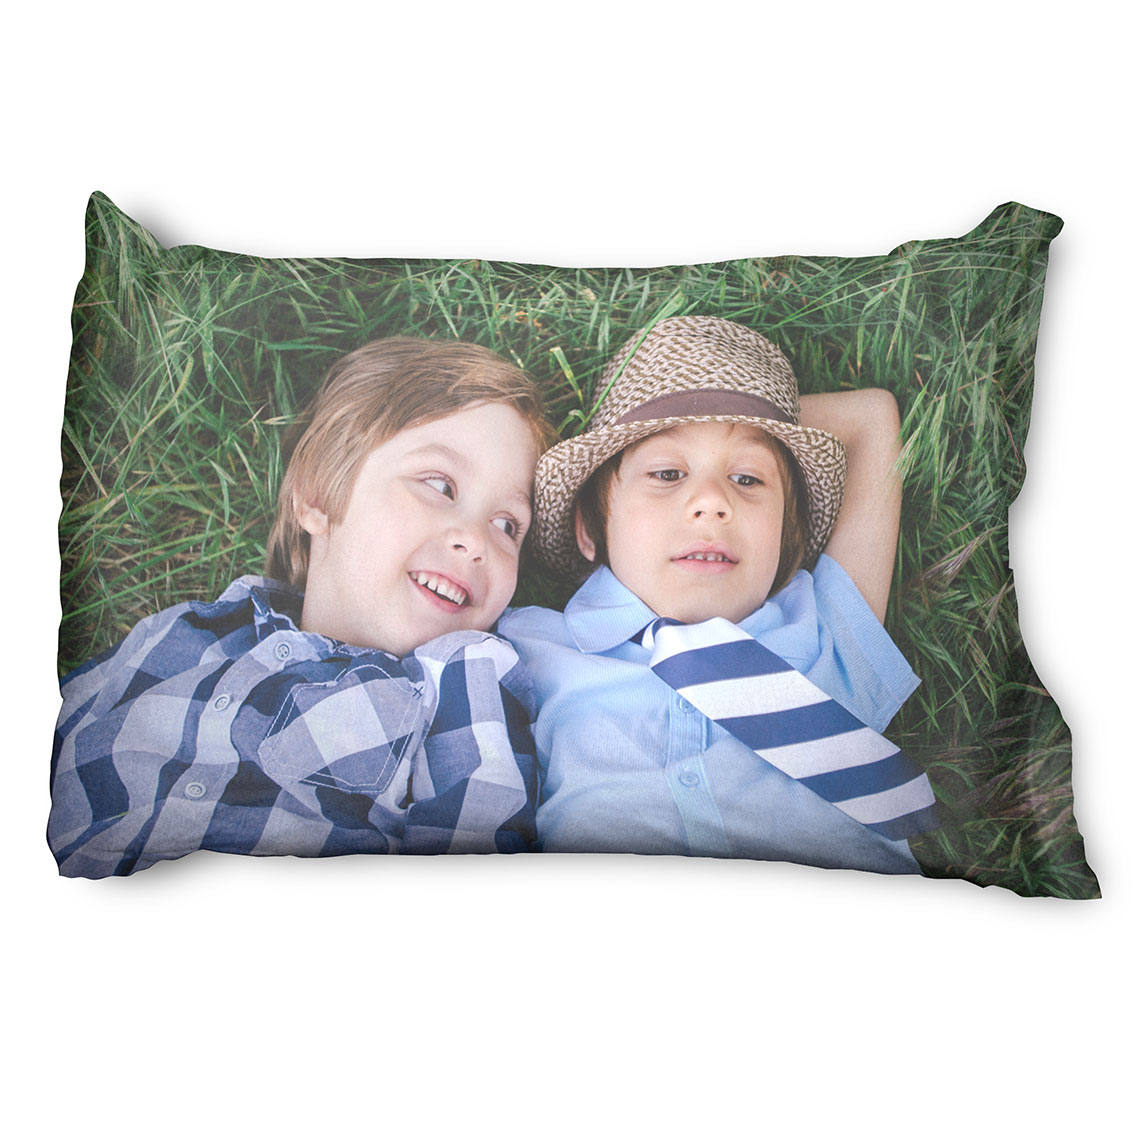 Customized Cushion, Photo Pillow, Pillow with pictures, Customized  Pillow